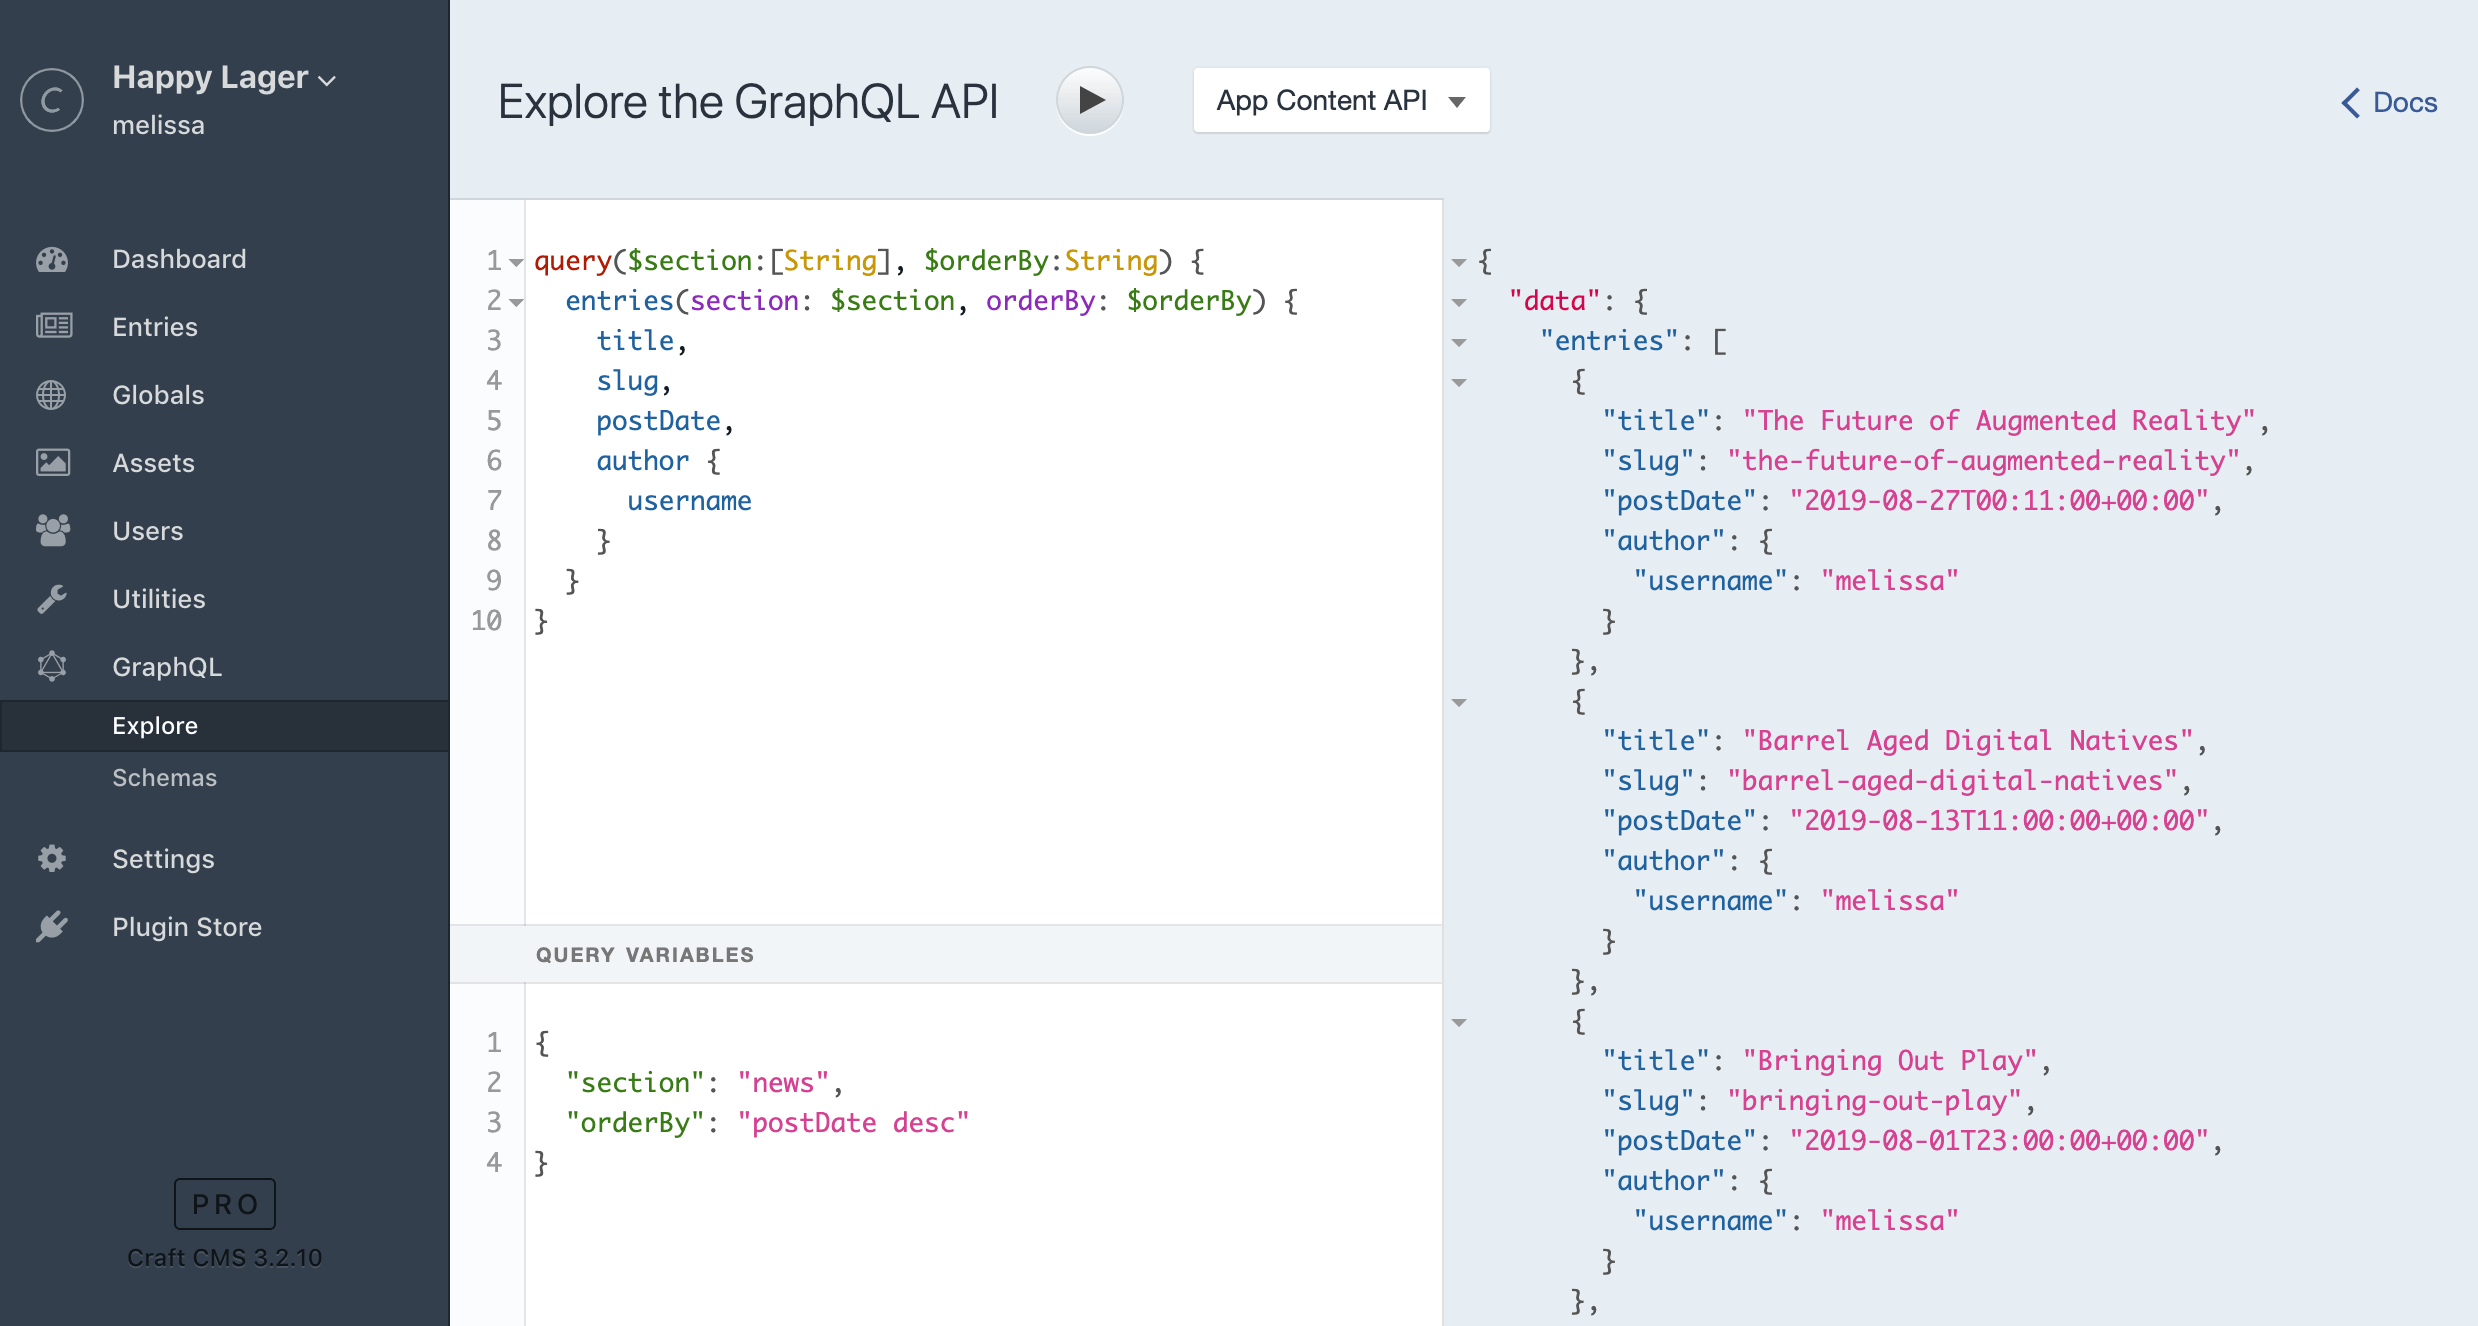 The built-in GraphiQL IDE